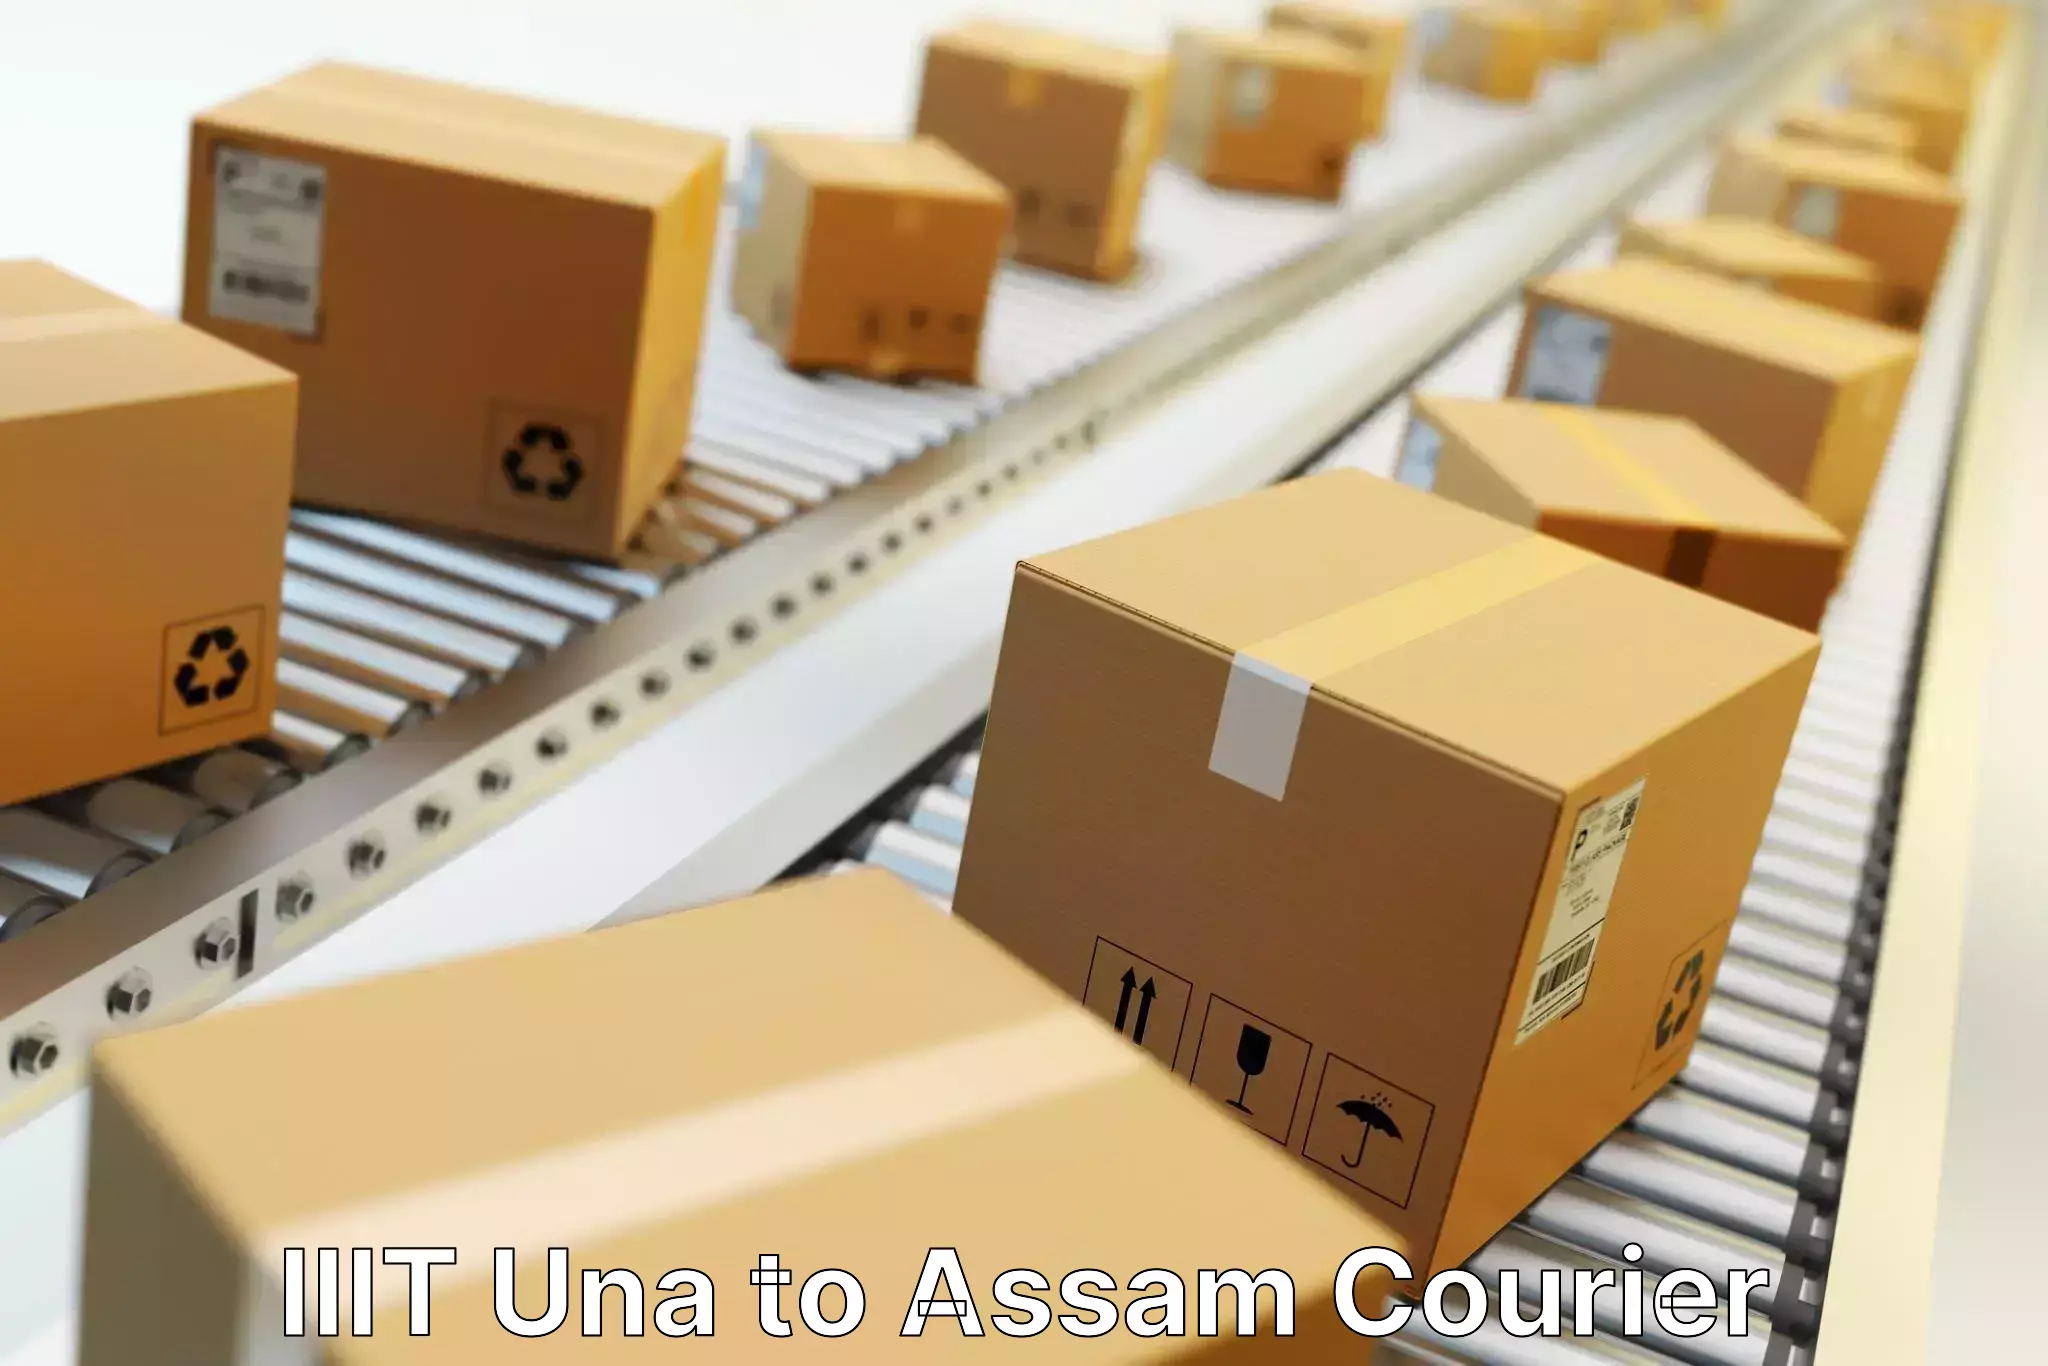 Next-day delivery options IIIT Una to Karbi Anglong